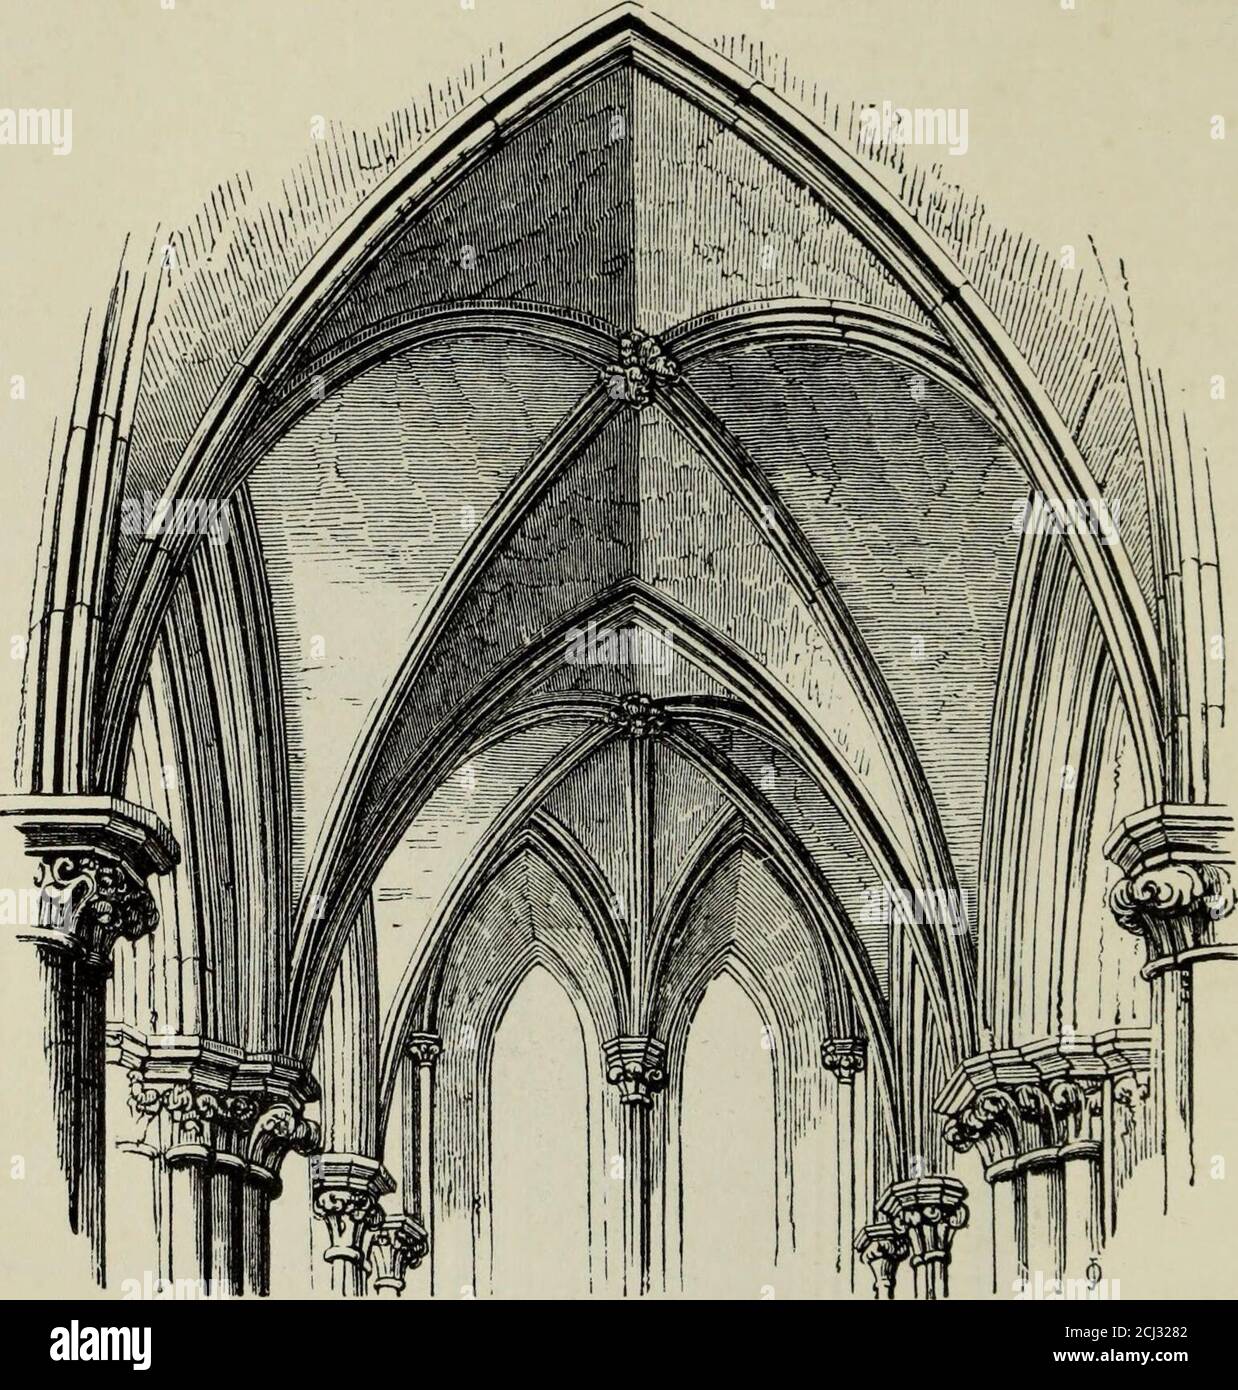 . An introduction to the study of Gothic architecture . 110. Barnack, Northamptonsliire, c. 1250. much enriched with mouldings and shafts of greatdepth, and the walls are ornamented on the insidewith arcades and tracery. 148 EARLY ENGLISH VAULTS. The Vaults are distinguished from the Norman bytheir greater boldness, and from succeeding stylesby their greater simplicity, as at Salisbury (HI).. 111. Salisbury Cathedral, c. 1240.Early English vault, groined, with moulded ribs on the groins only. In the earlier examples there are ribs on the anglesof the groins only; at a later period the vaulting Stock Photo